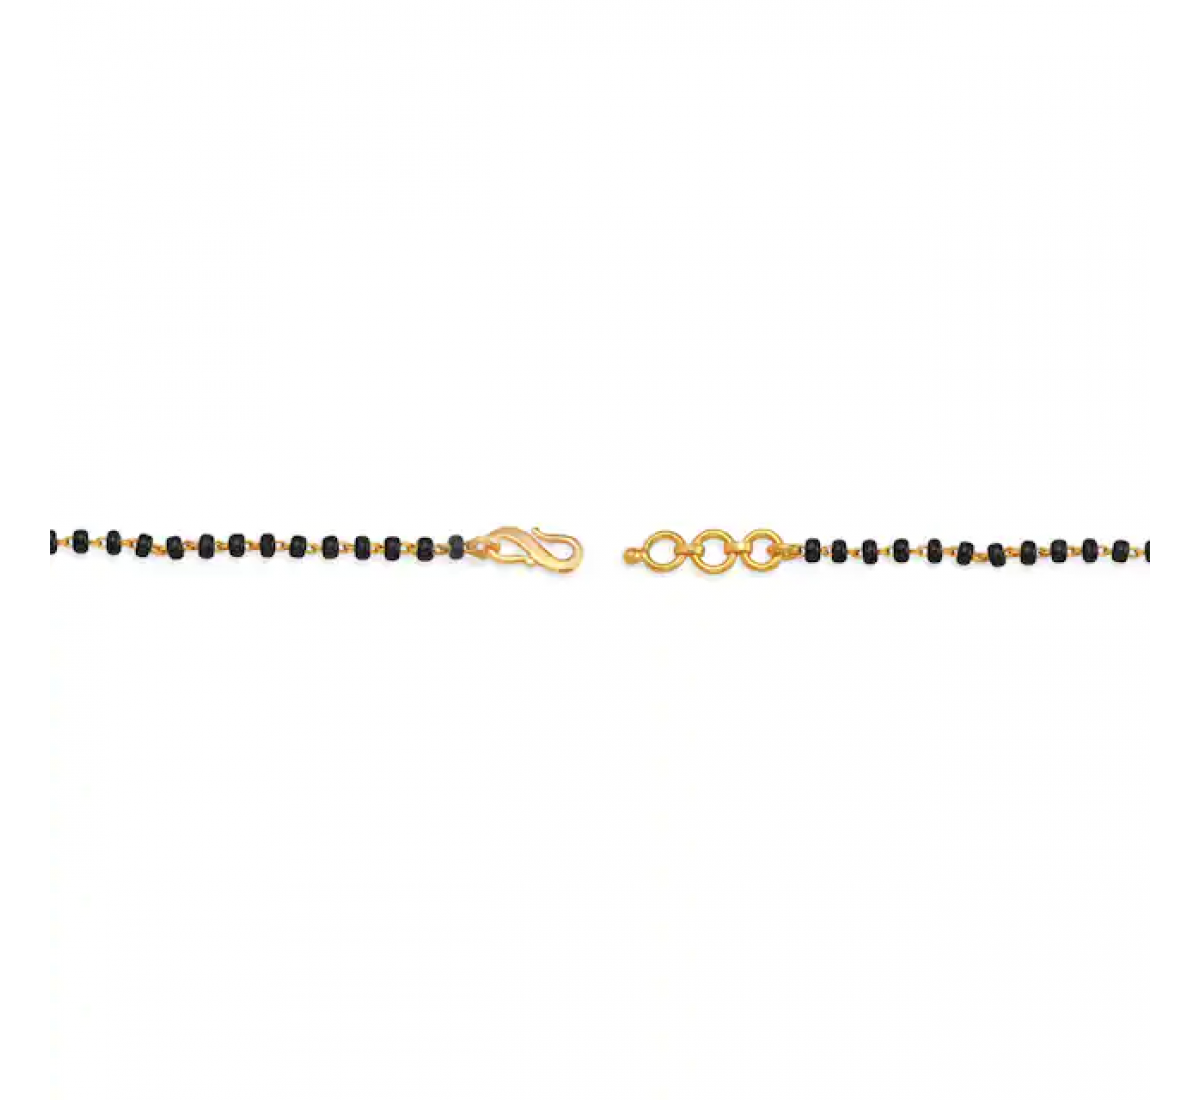 Free Png New Men Bracelet Beads Png Image With Transparent  Black Onyx  Stone Bracelet Png Download  850x4655858193  PngFind